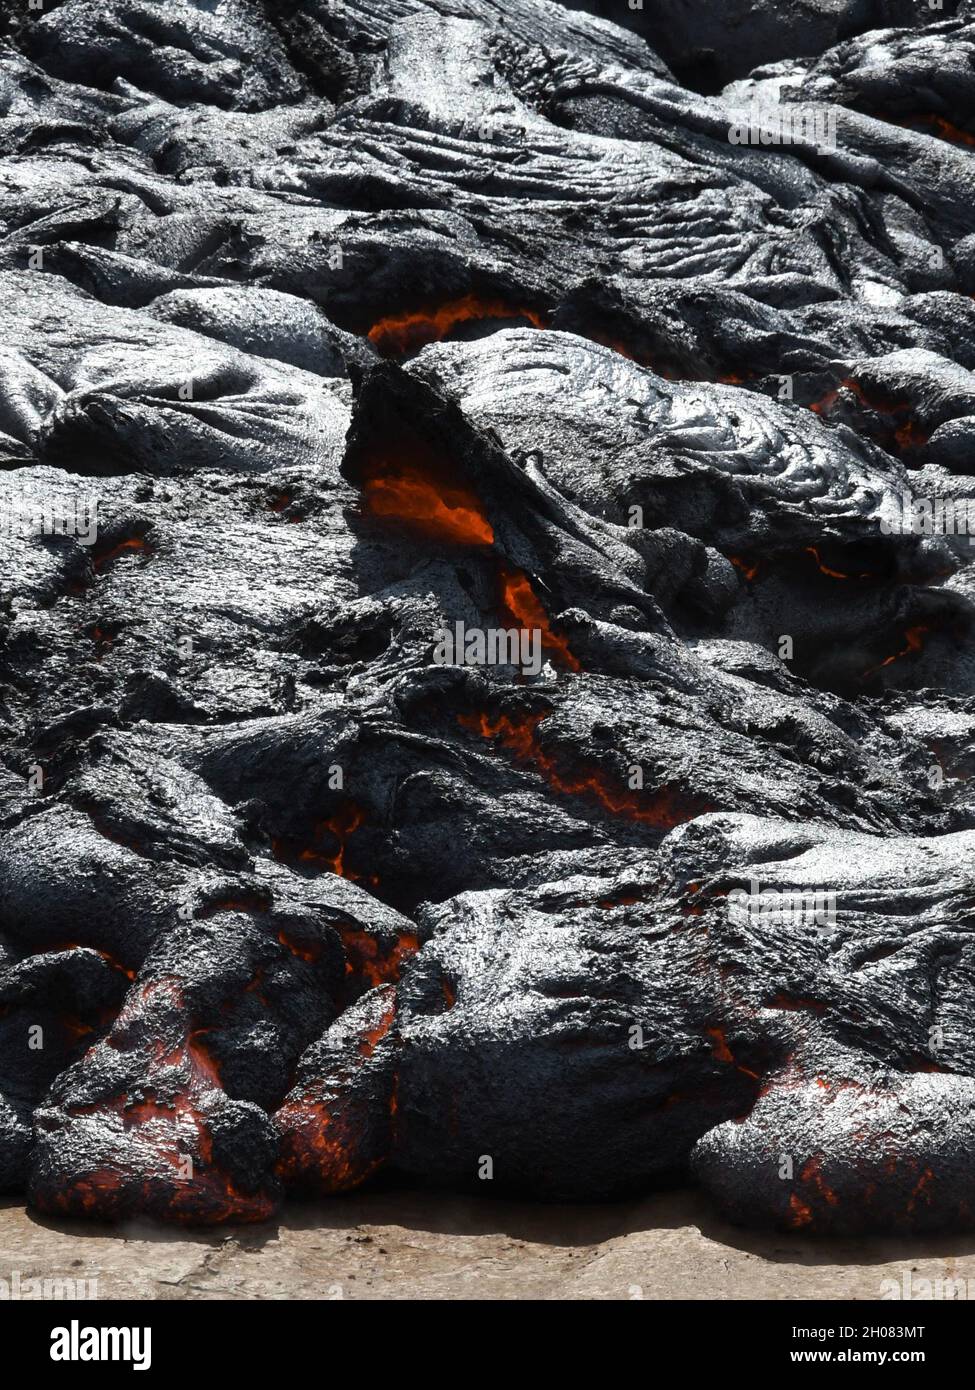 Pahoehoe lava flow at Fagradalsfjall, Iceland. Lava crust is gray and black, molten lava is red and orange. Stock Photo